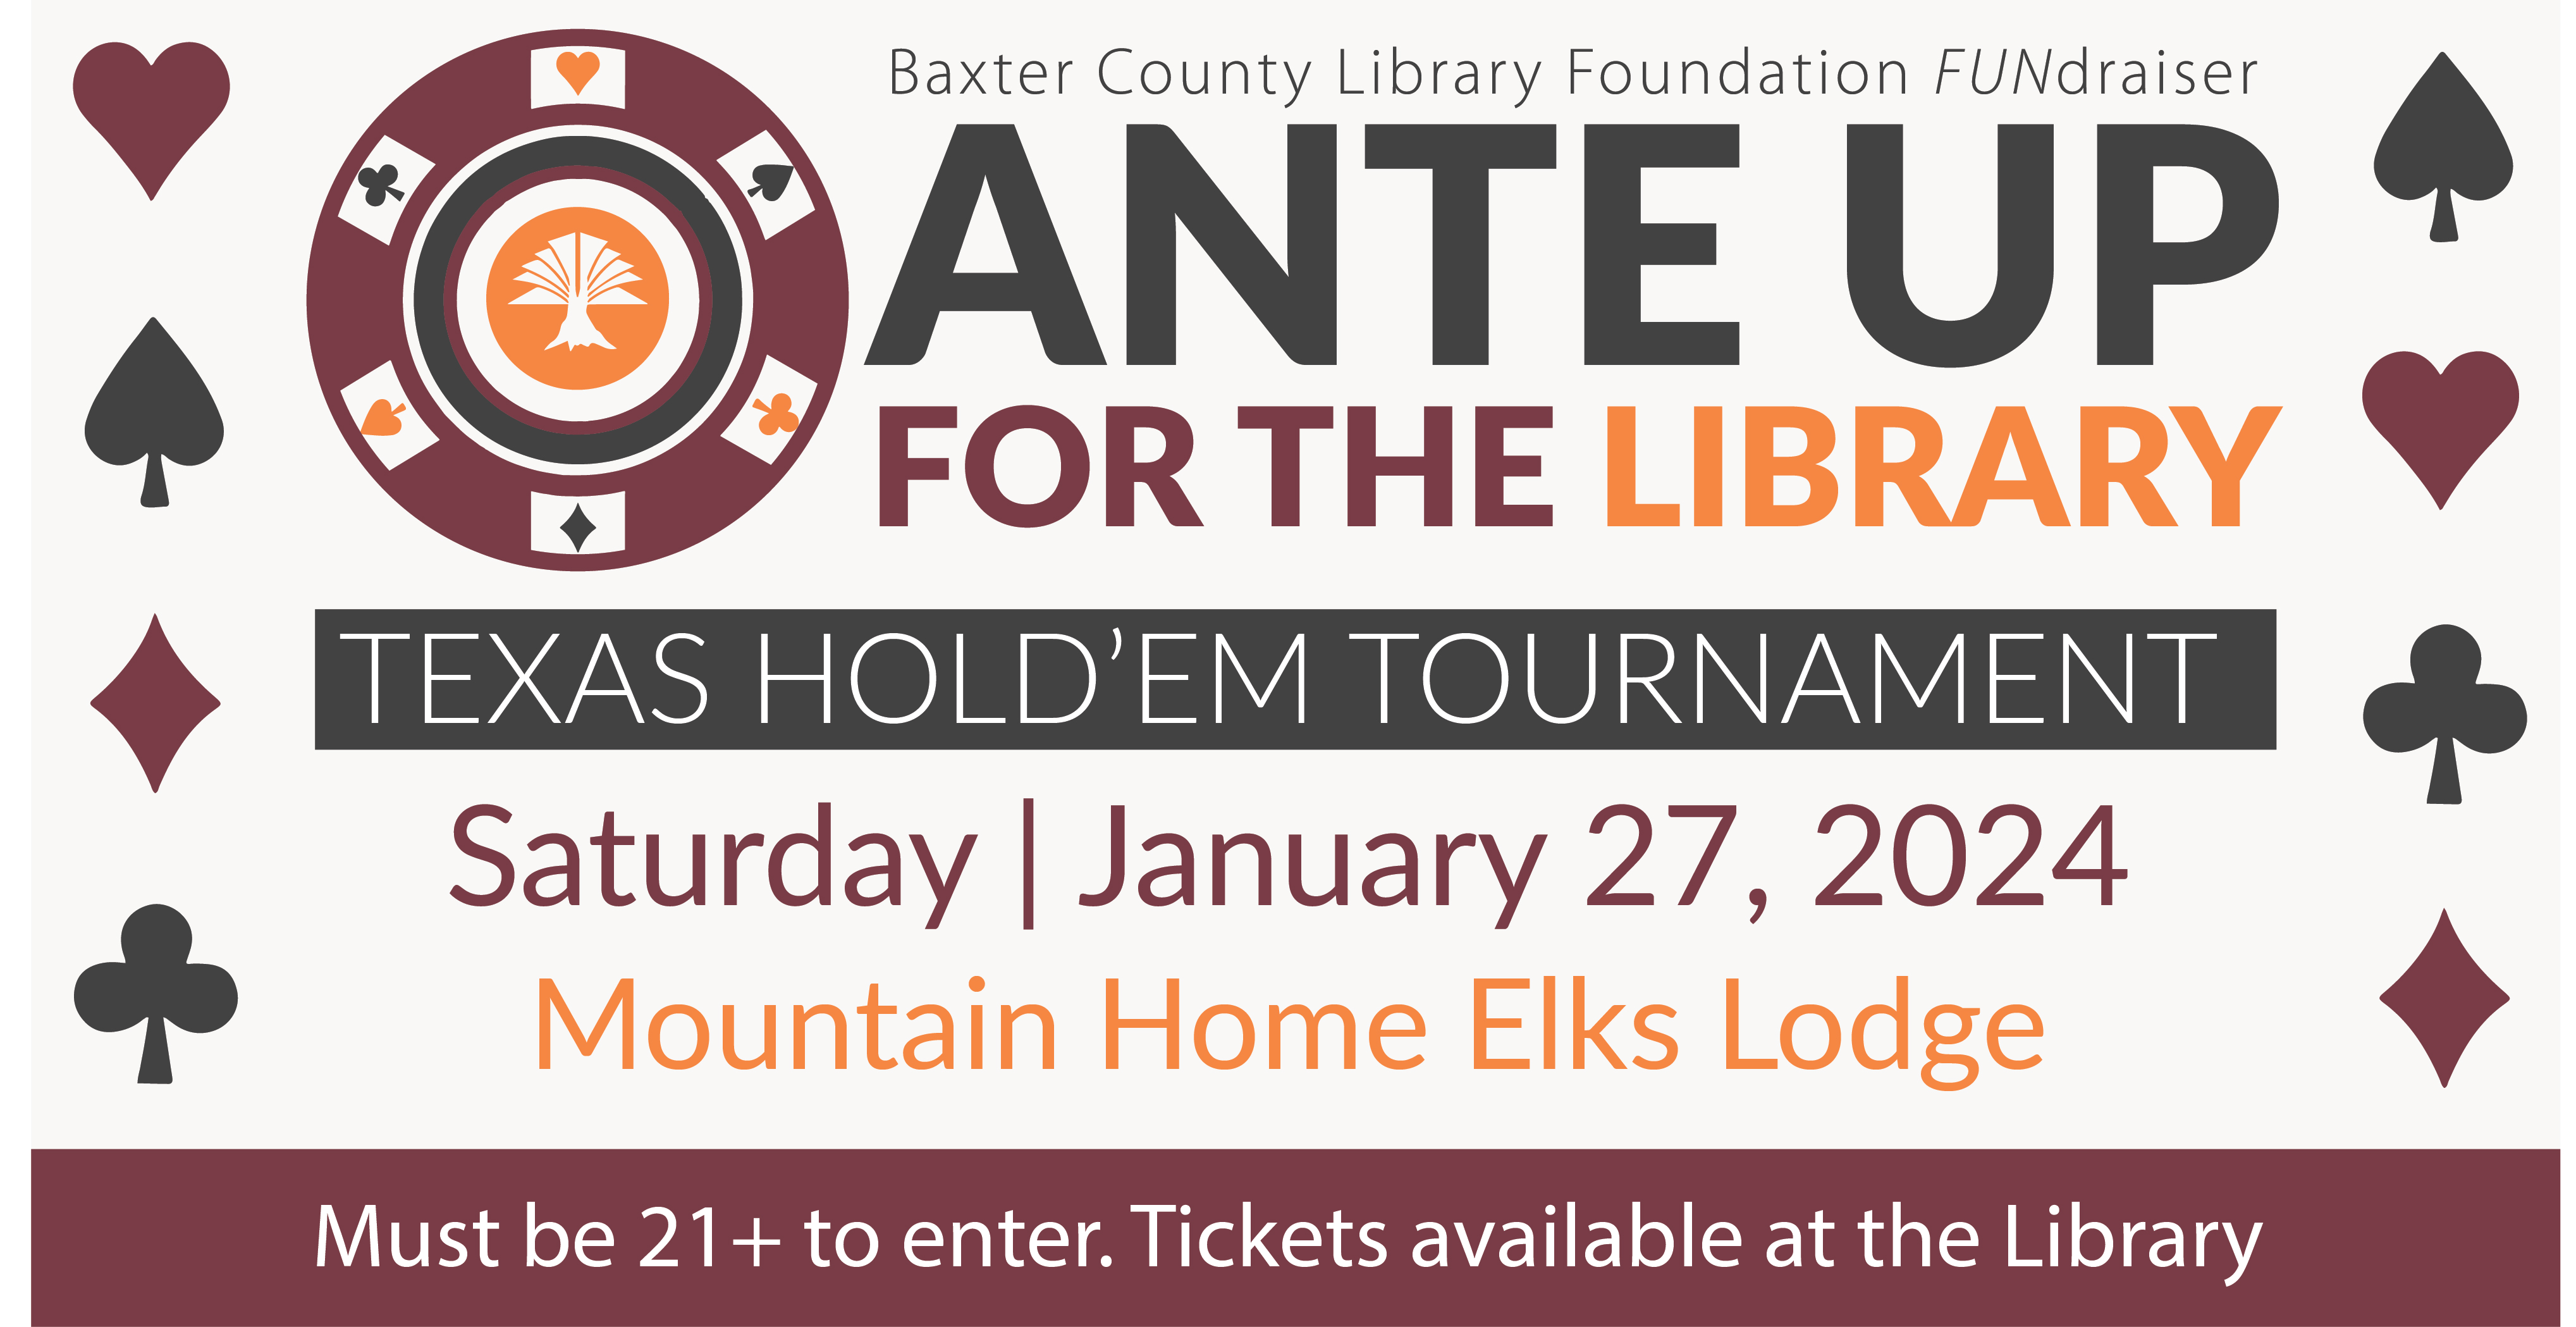 Ante Up for the Library Texas Hold'em Tournament. Saturday, January 27. Mountain Home Elks Lodge. Must be 21+ to enter. Tickets available at the Library.